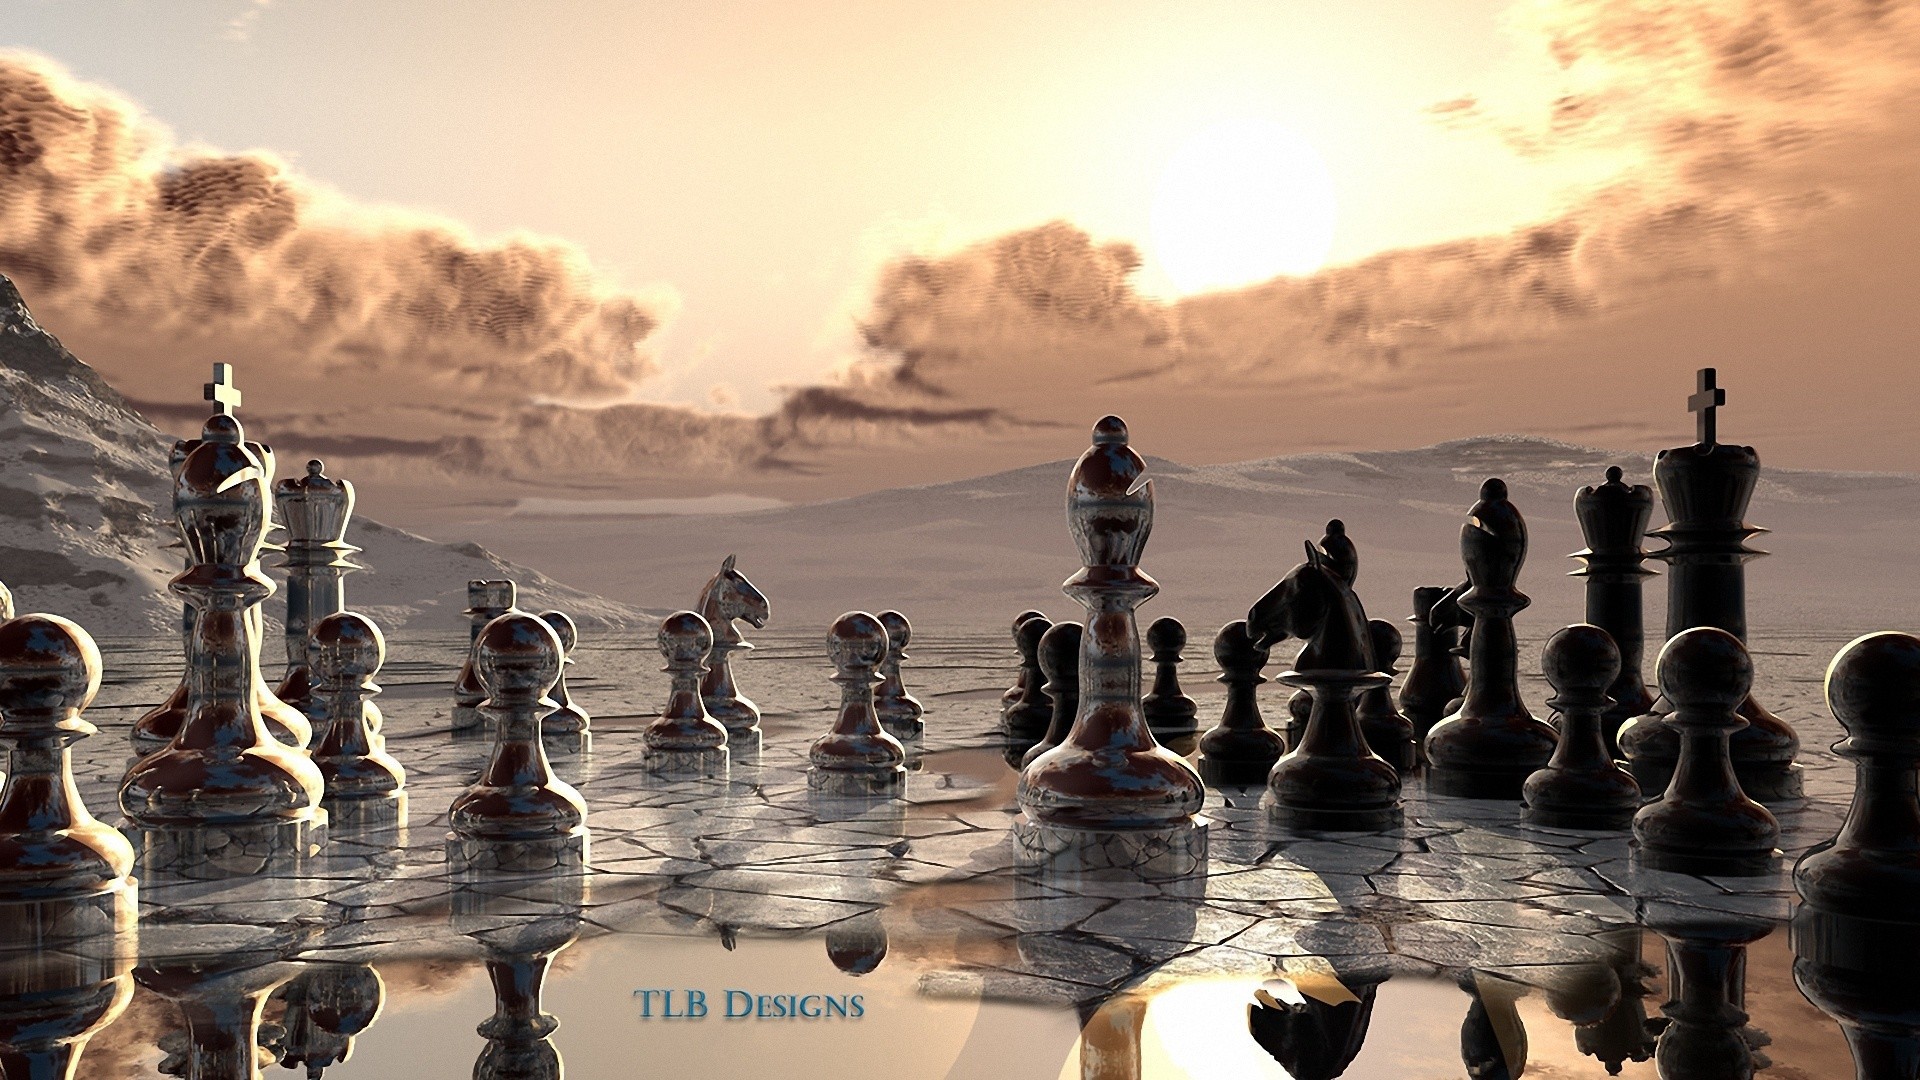 Chess in the desert wallpapers and images - wallpapers, pictures, photos